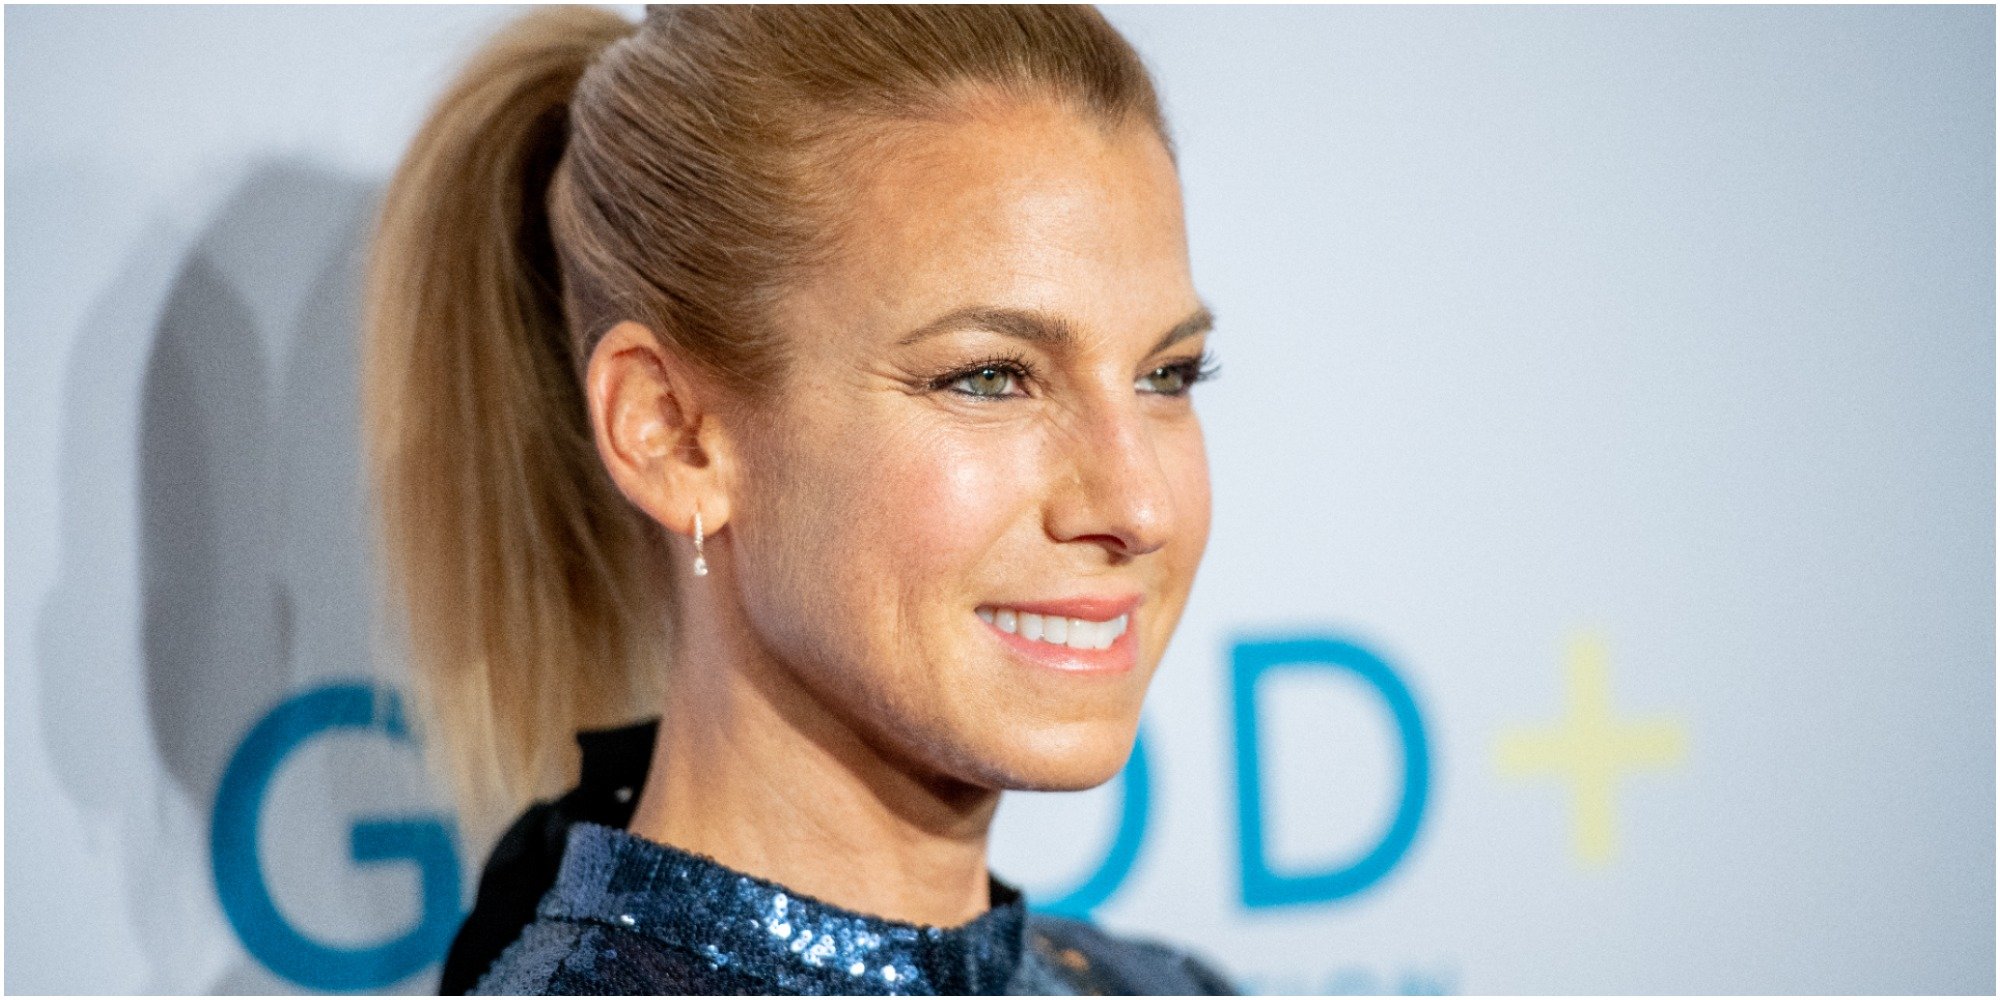 Jessica Seinfeld appears at a red carpet event in 2018.